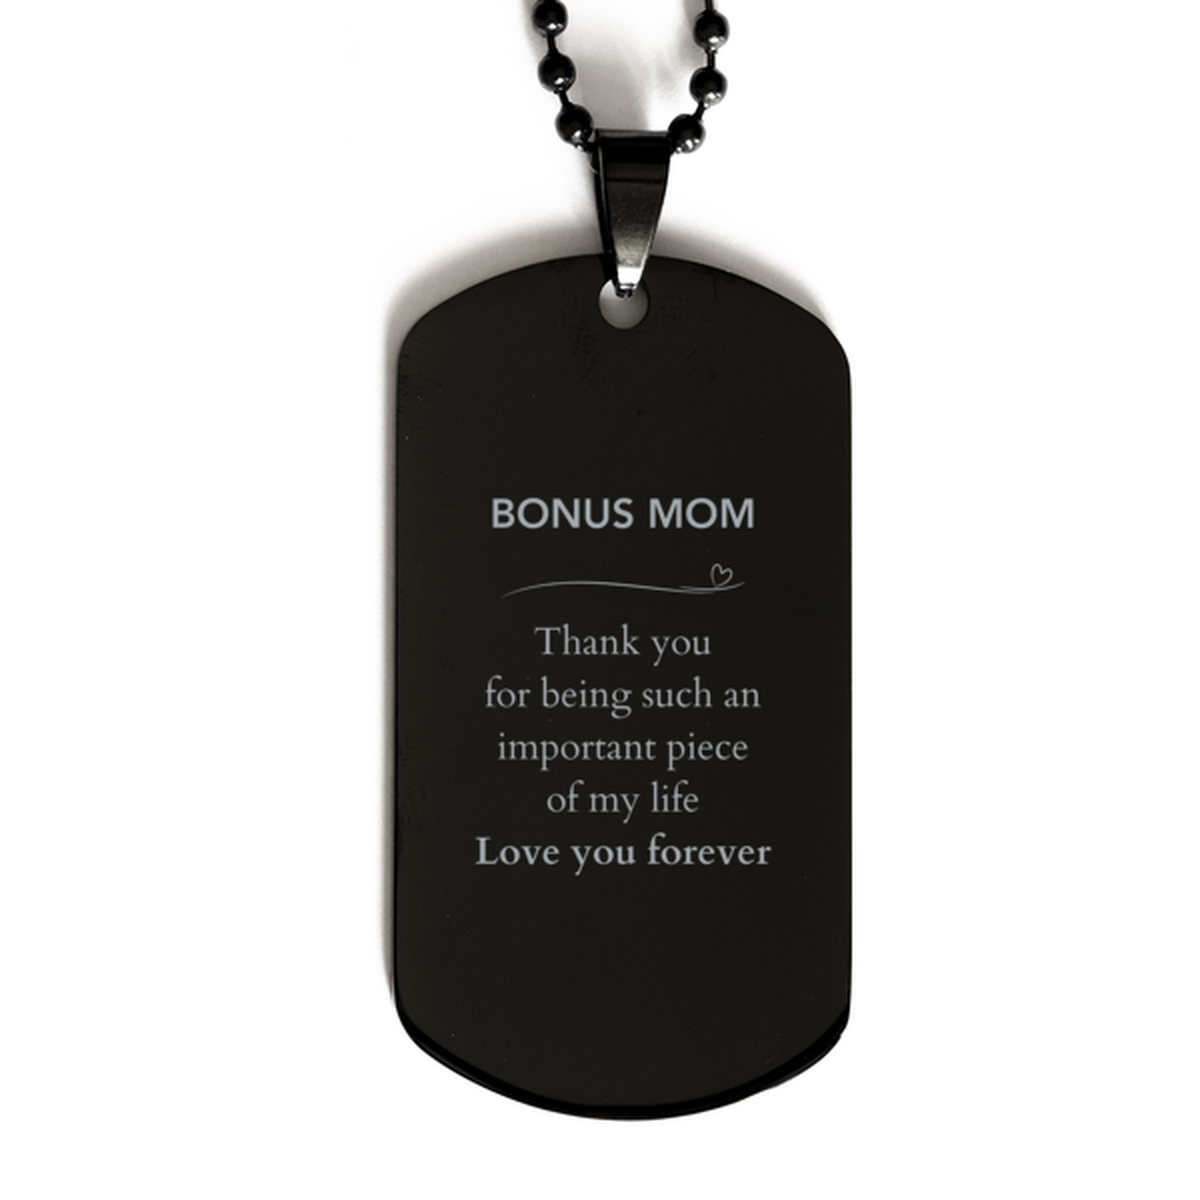 Appropriate Bonus Mom Black Dog Tag Epic Birthday Gifts for Bonus Mom Thank you for being such an important piece of my life Bonus Mom Christmas Mothers Fathers Day